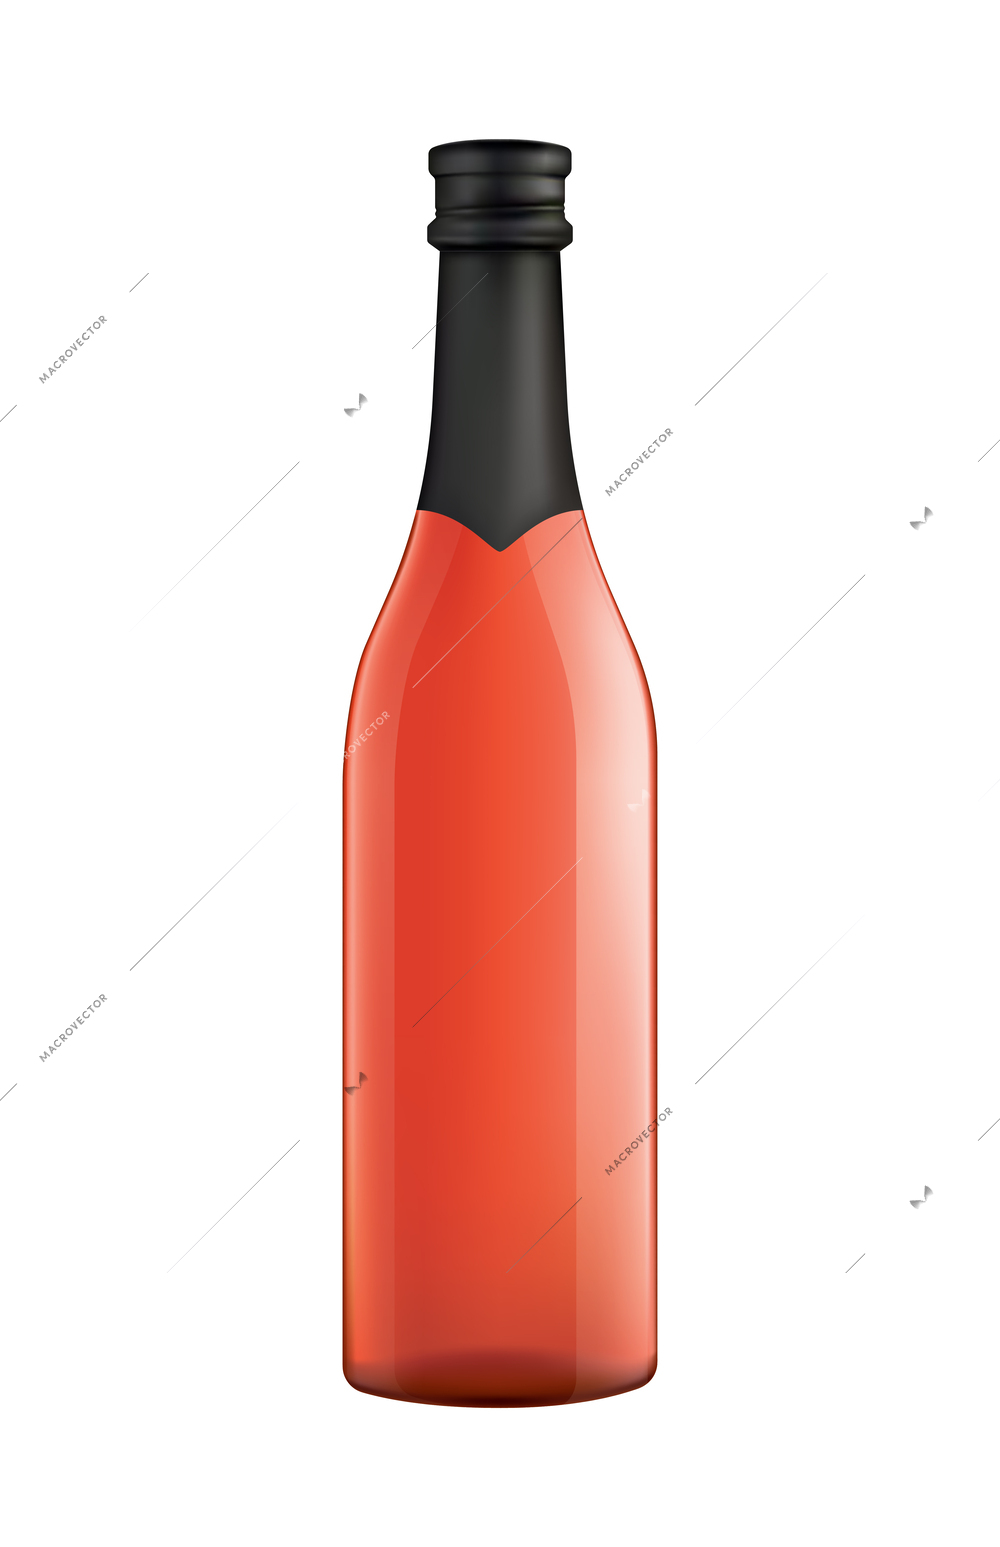 Wine realistic composition with isolated image of bottled alcohol on blank background vector illustration